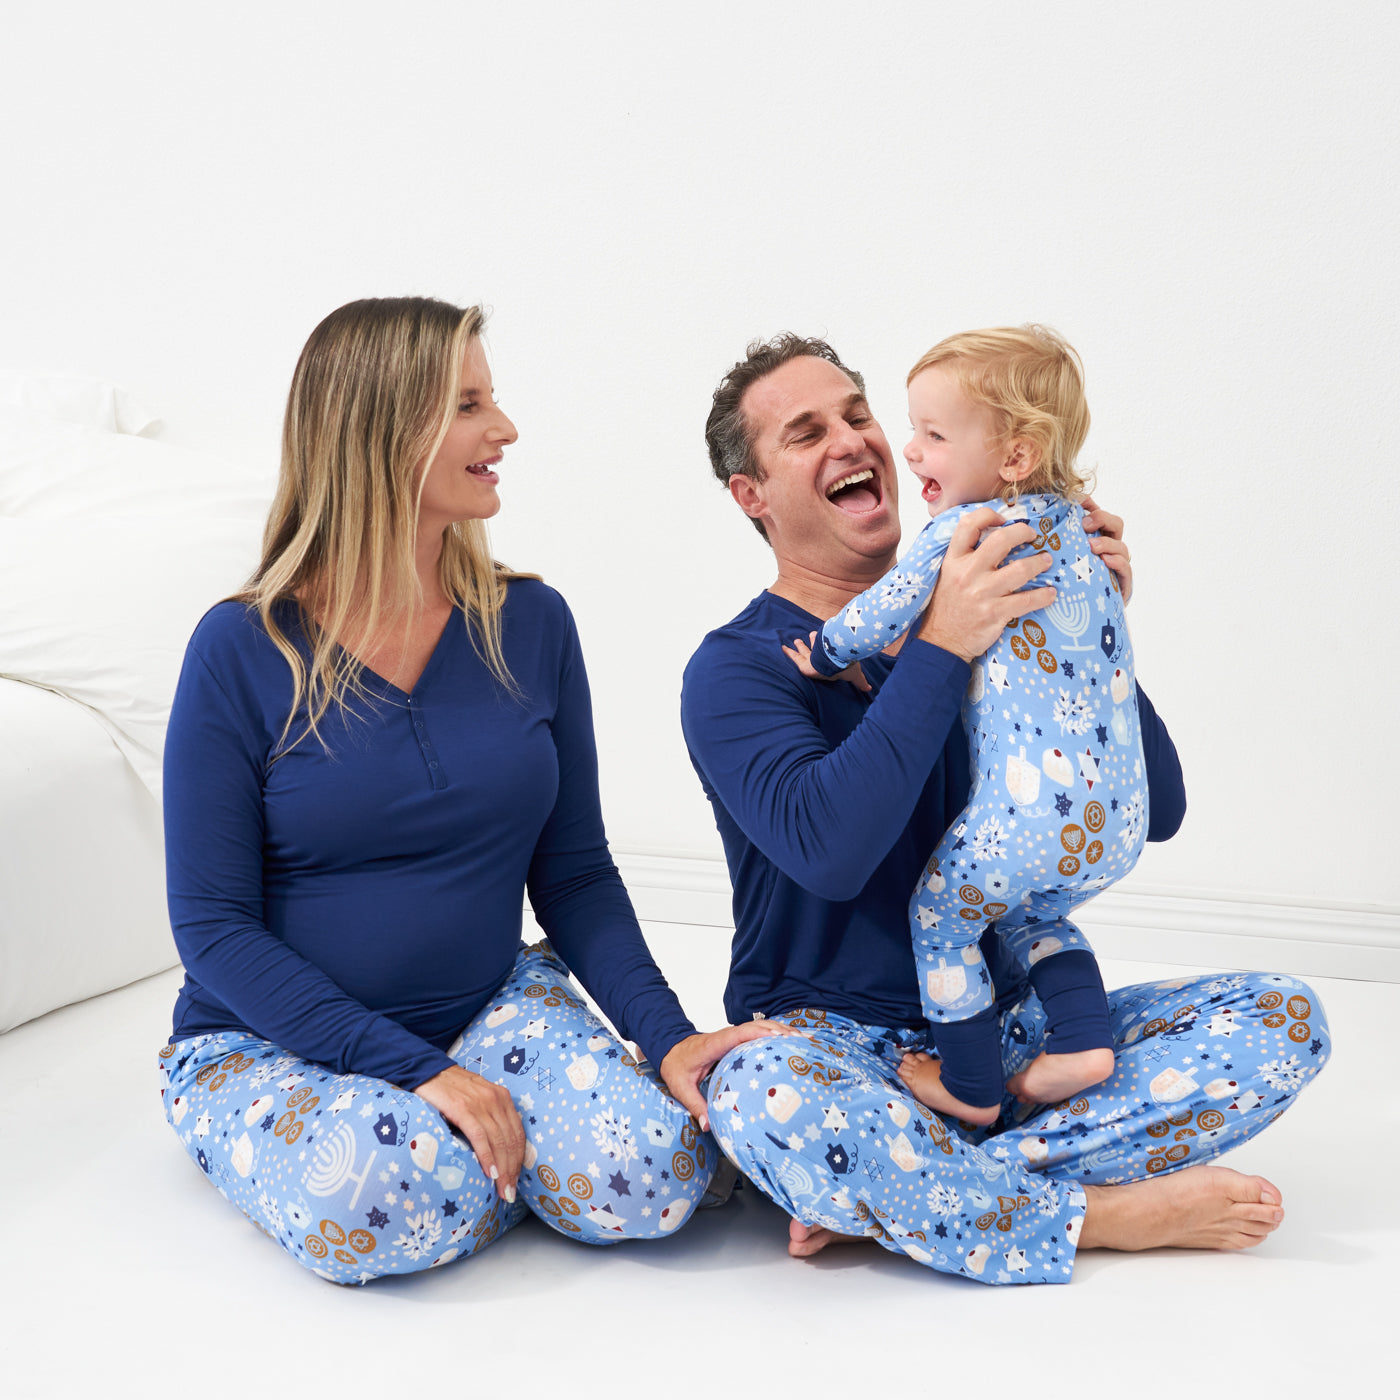 Family of three posing together wearing Hanukkah Lights and Love pajama sets. Dad is wearing a Hanukkah Lights and Love men's pajama pants and Sapphire men's top. Mom is wearing Hanukkah Lights and Love women's pajama pants and Sapphire women's pajama top. Child is wearing a Hanukkah Lights and Love zippy. 